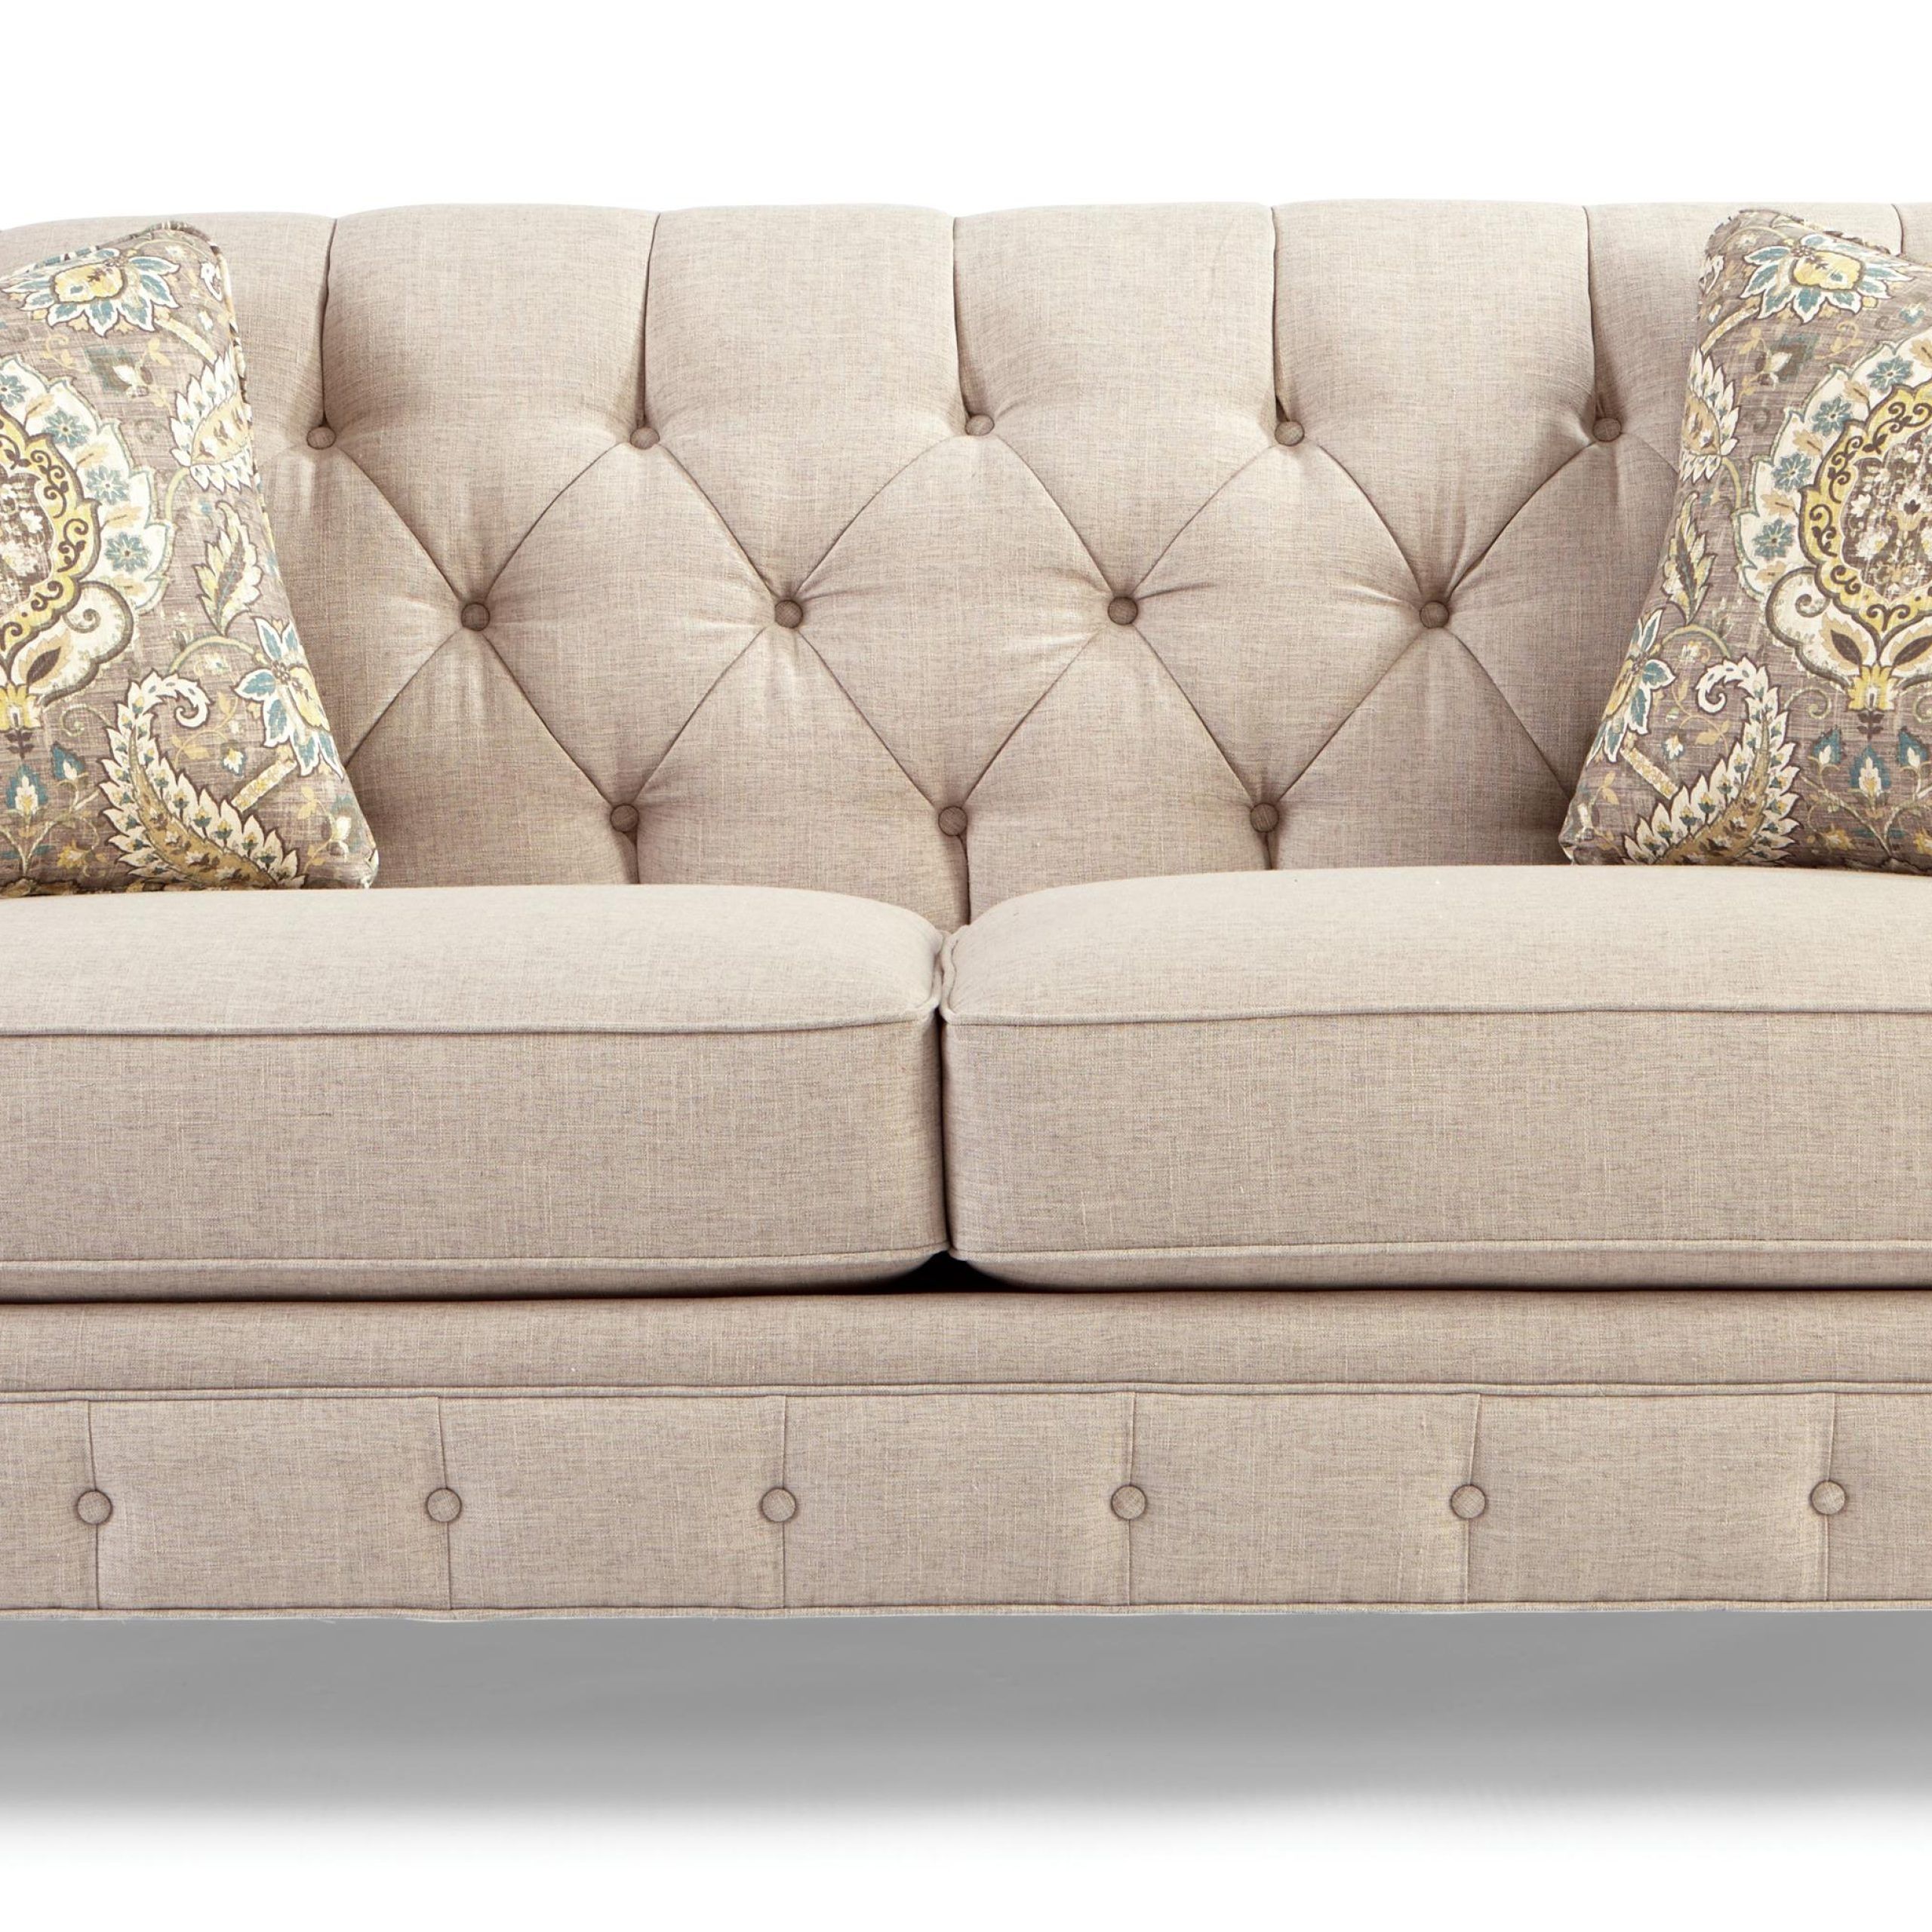 Traditional Button Tufted Sofa With Wide Flared Armscraftmaster Within Tufted Upholstered Sofas (Gallery 4 of 20)